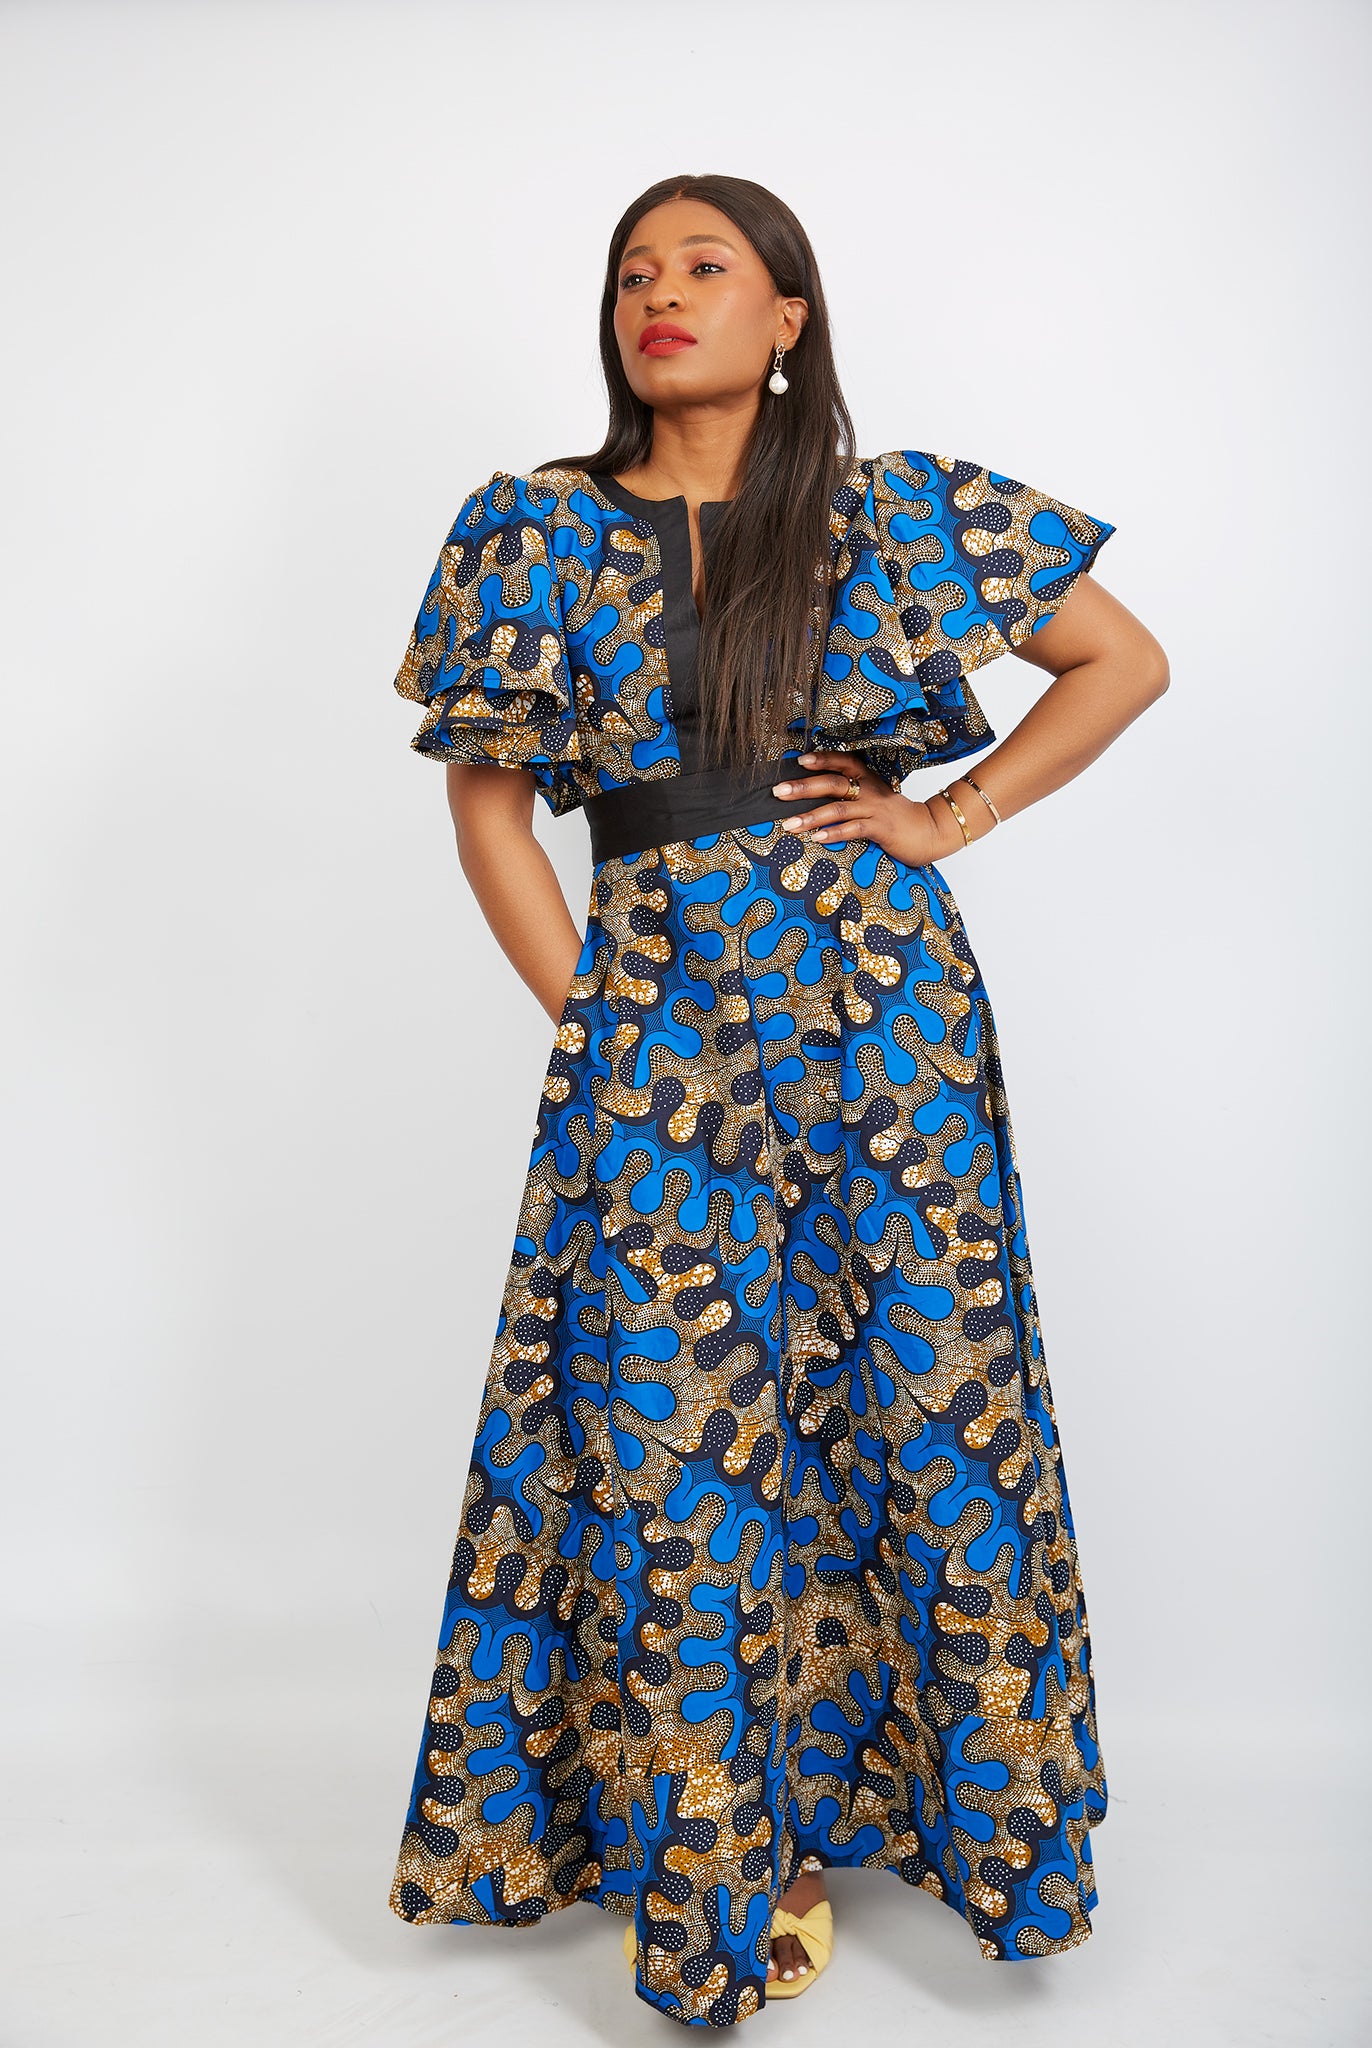 Shop African Dresses UK | Modern African Clothing | CUMO London – Page ...